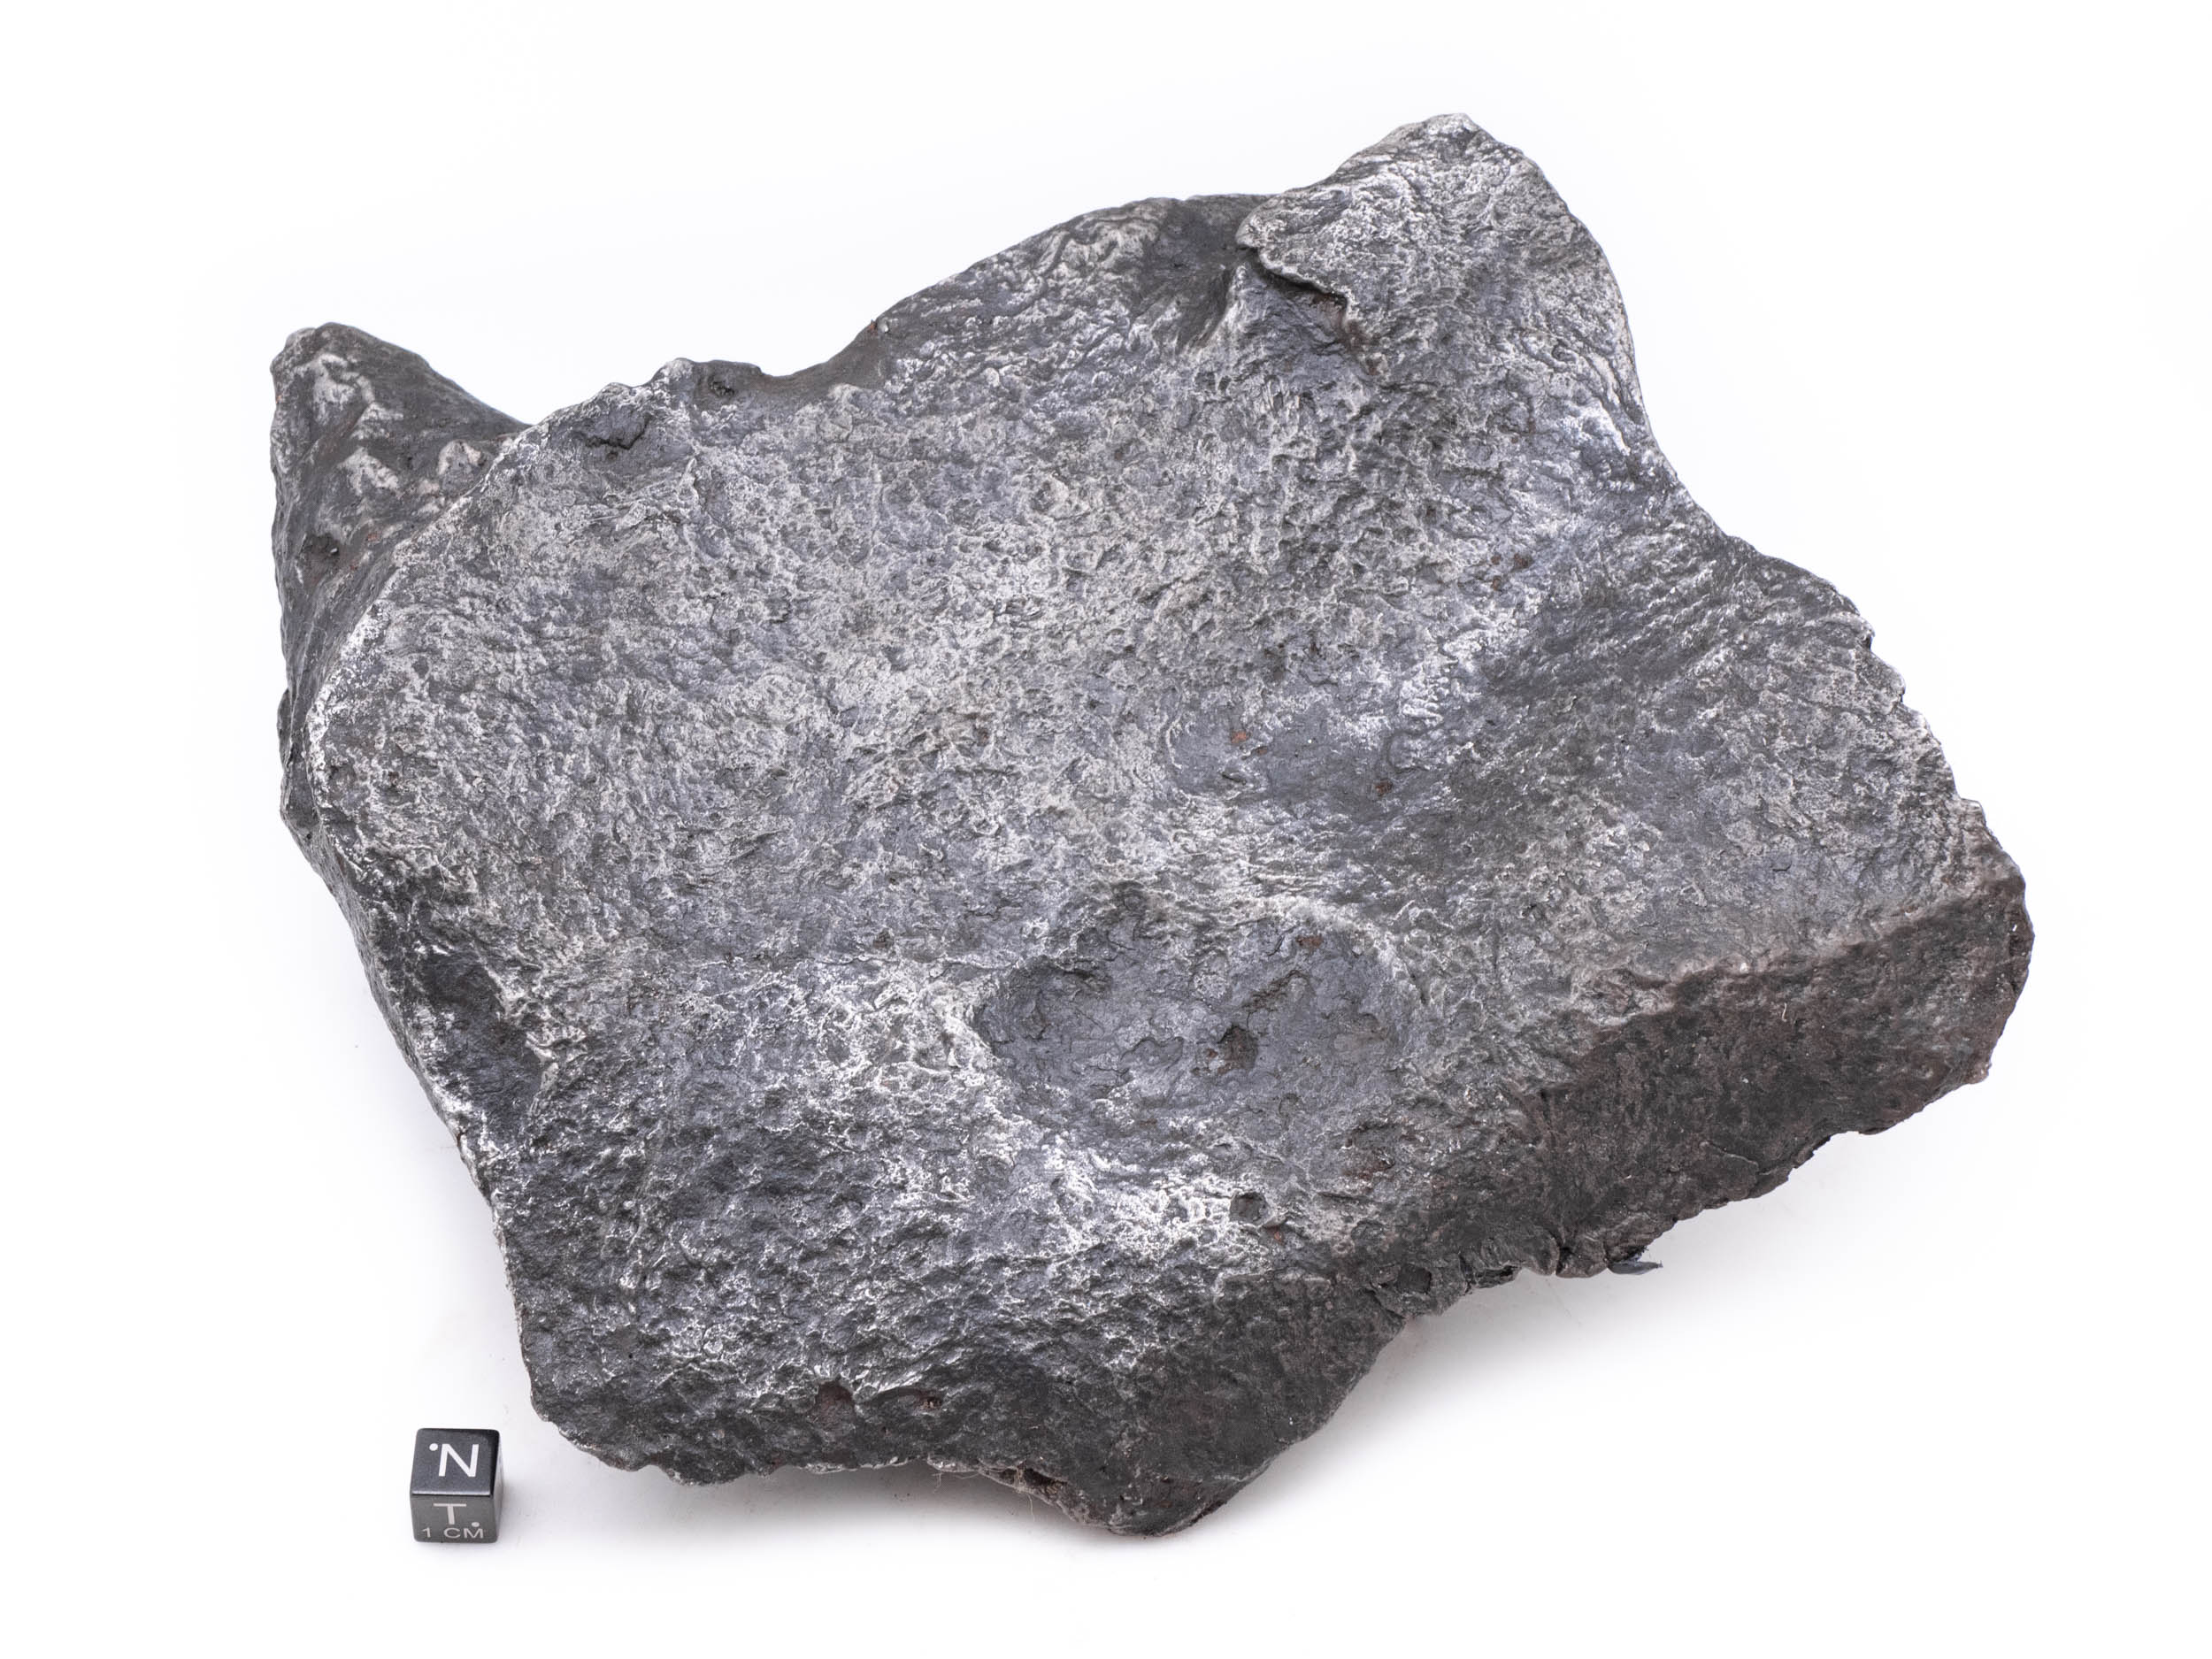 Dancing Bear BRAND Meteorite From Space 6 Pcs Campo Del Cielo Educational for sale online 